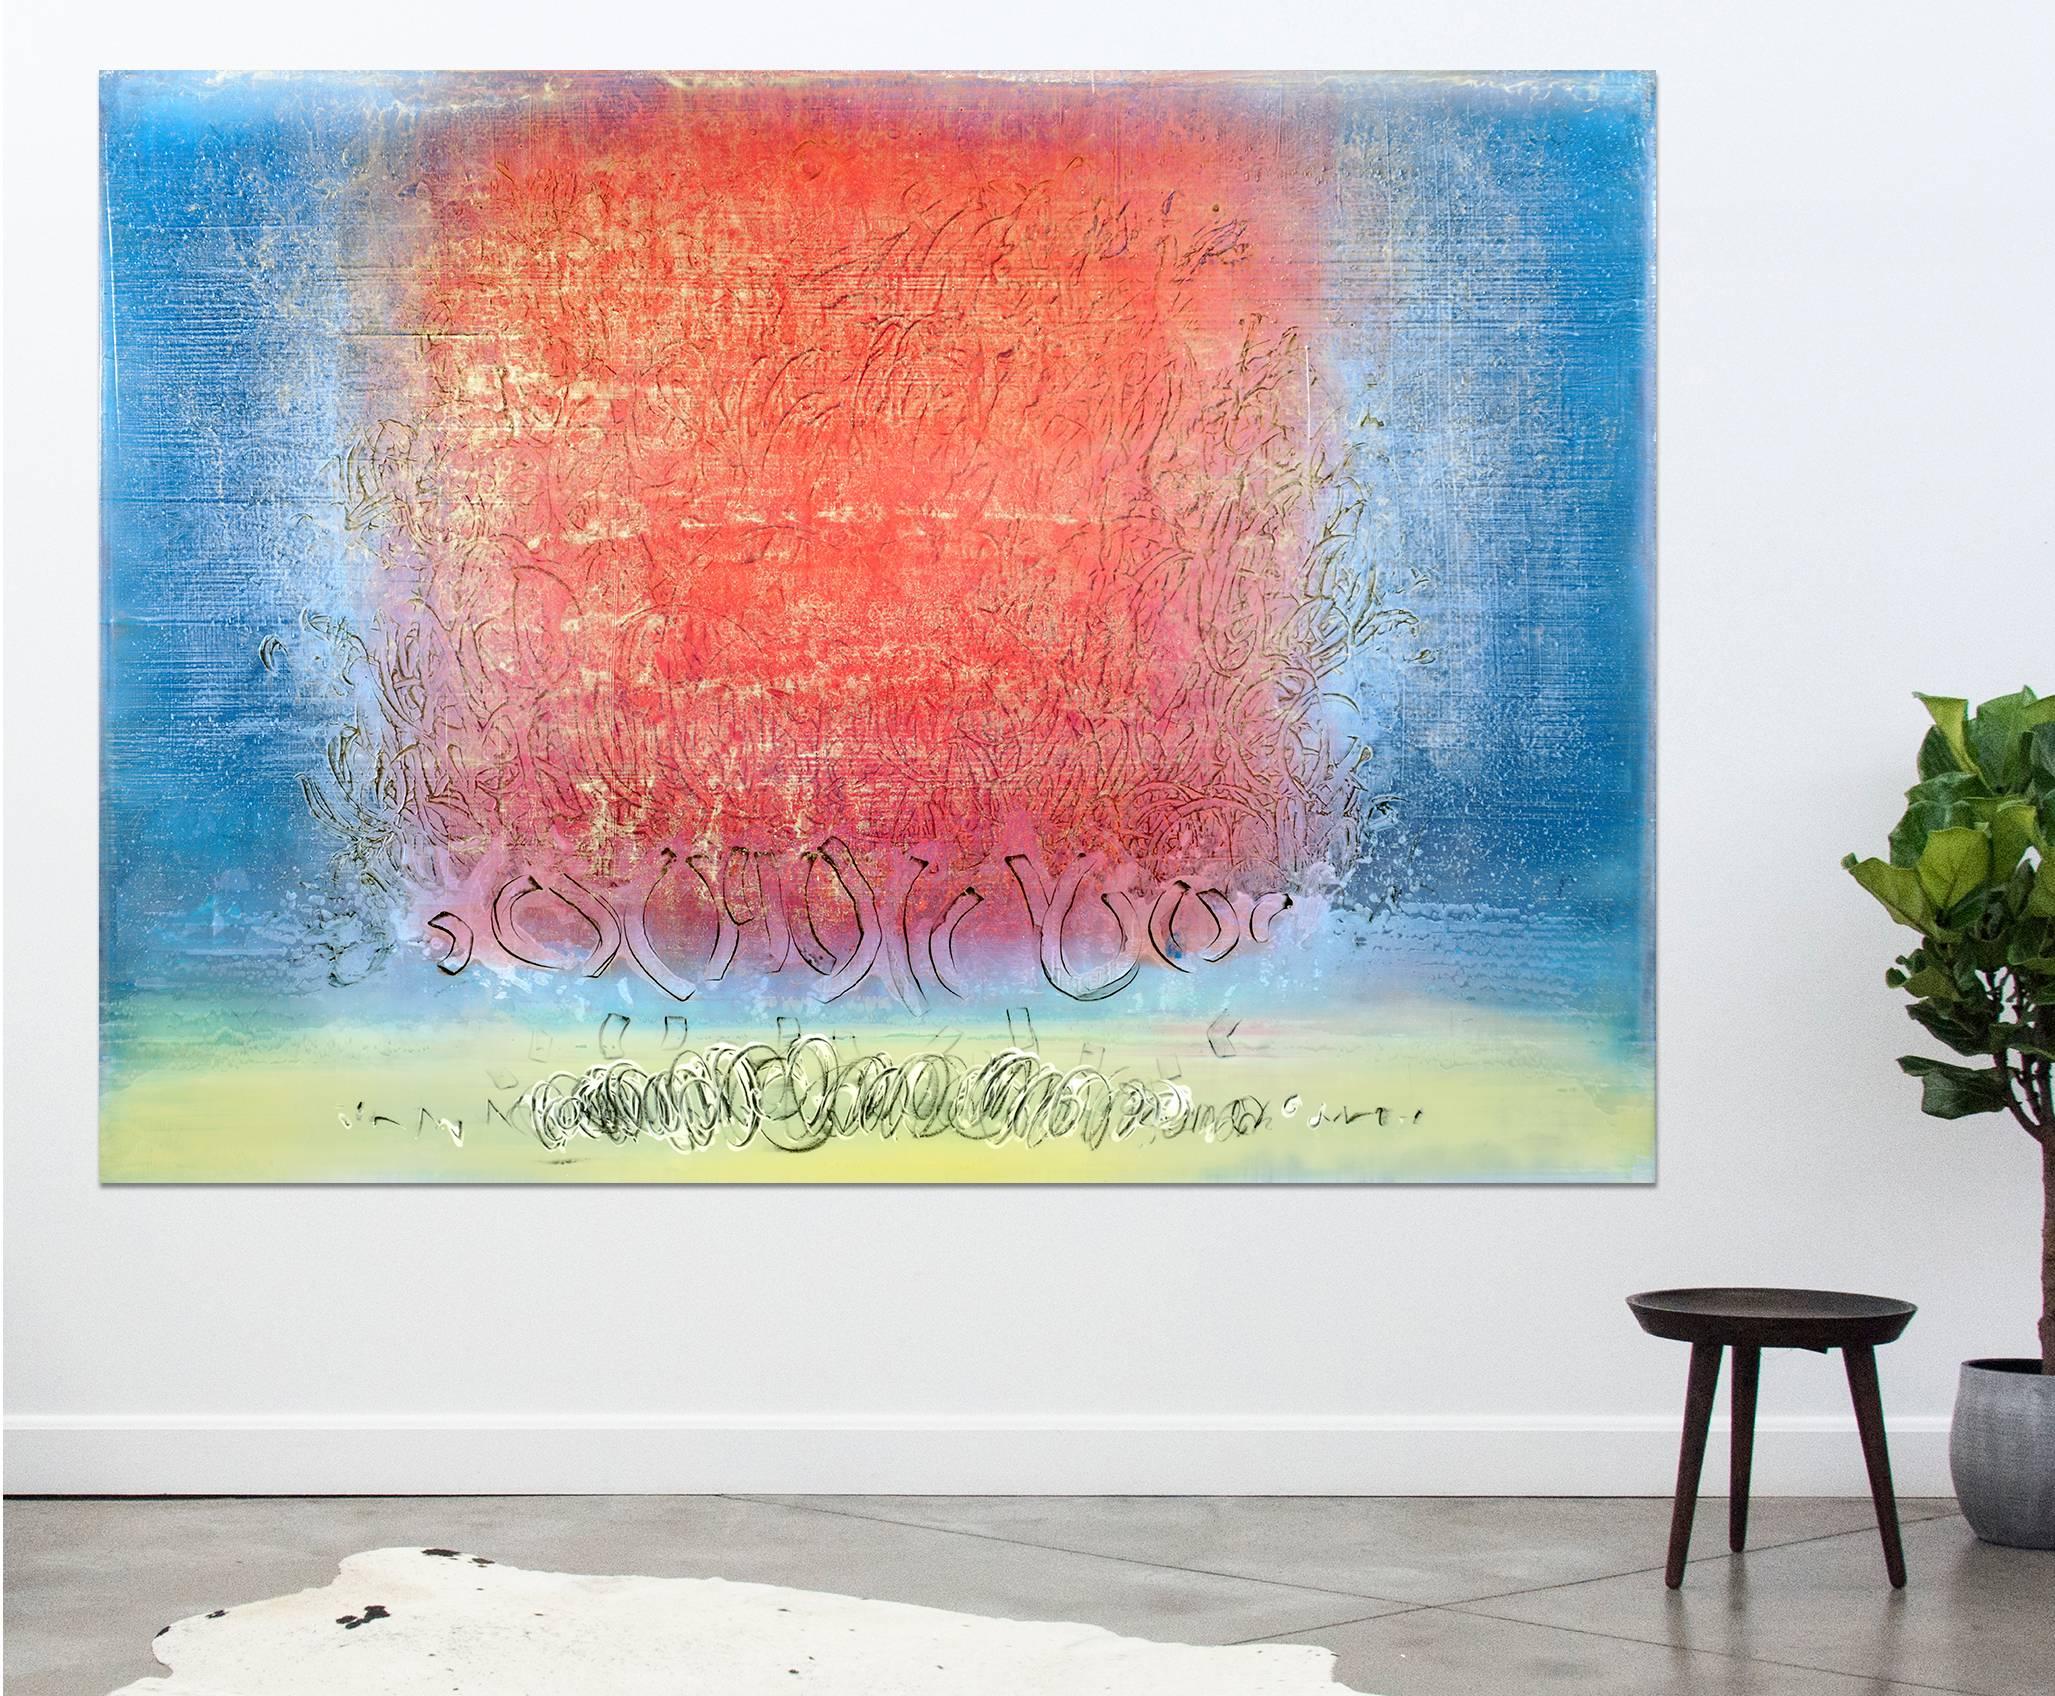 Spirit - large, red, blue, iridescent, gestural abstract, acrylic on canvas - Painting by Alice Teichert